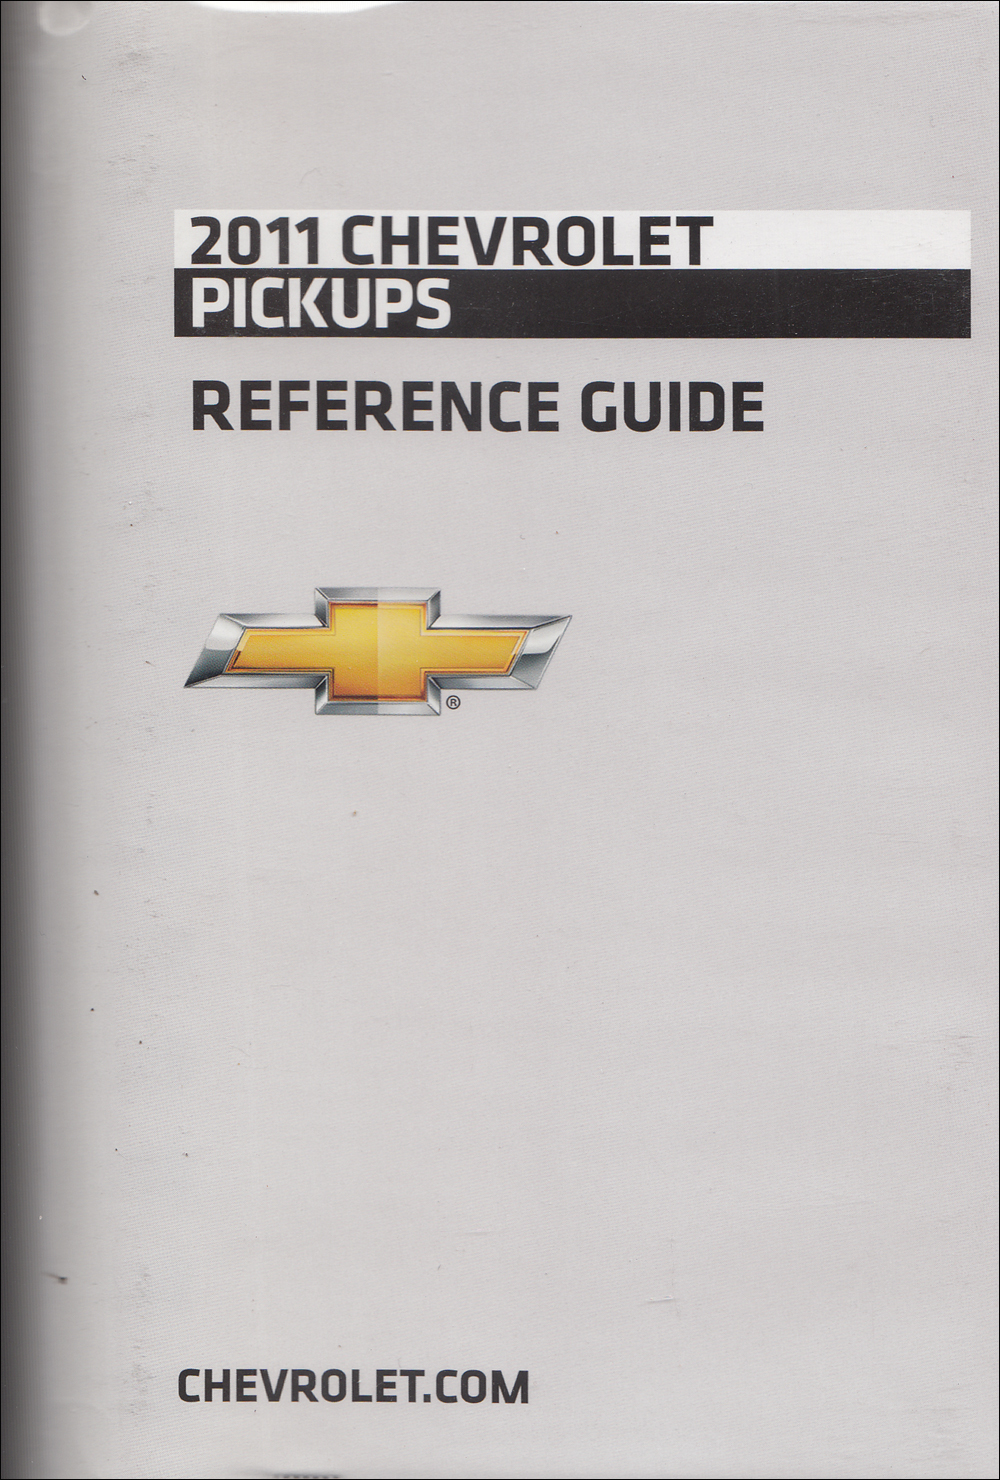 2011 Chevrolet Pickup Data Book with Color & Upholstery Original